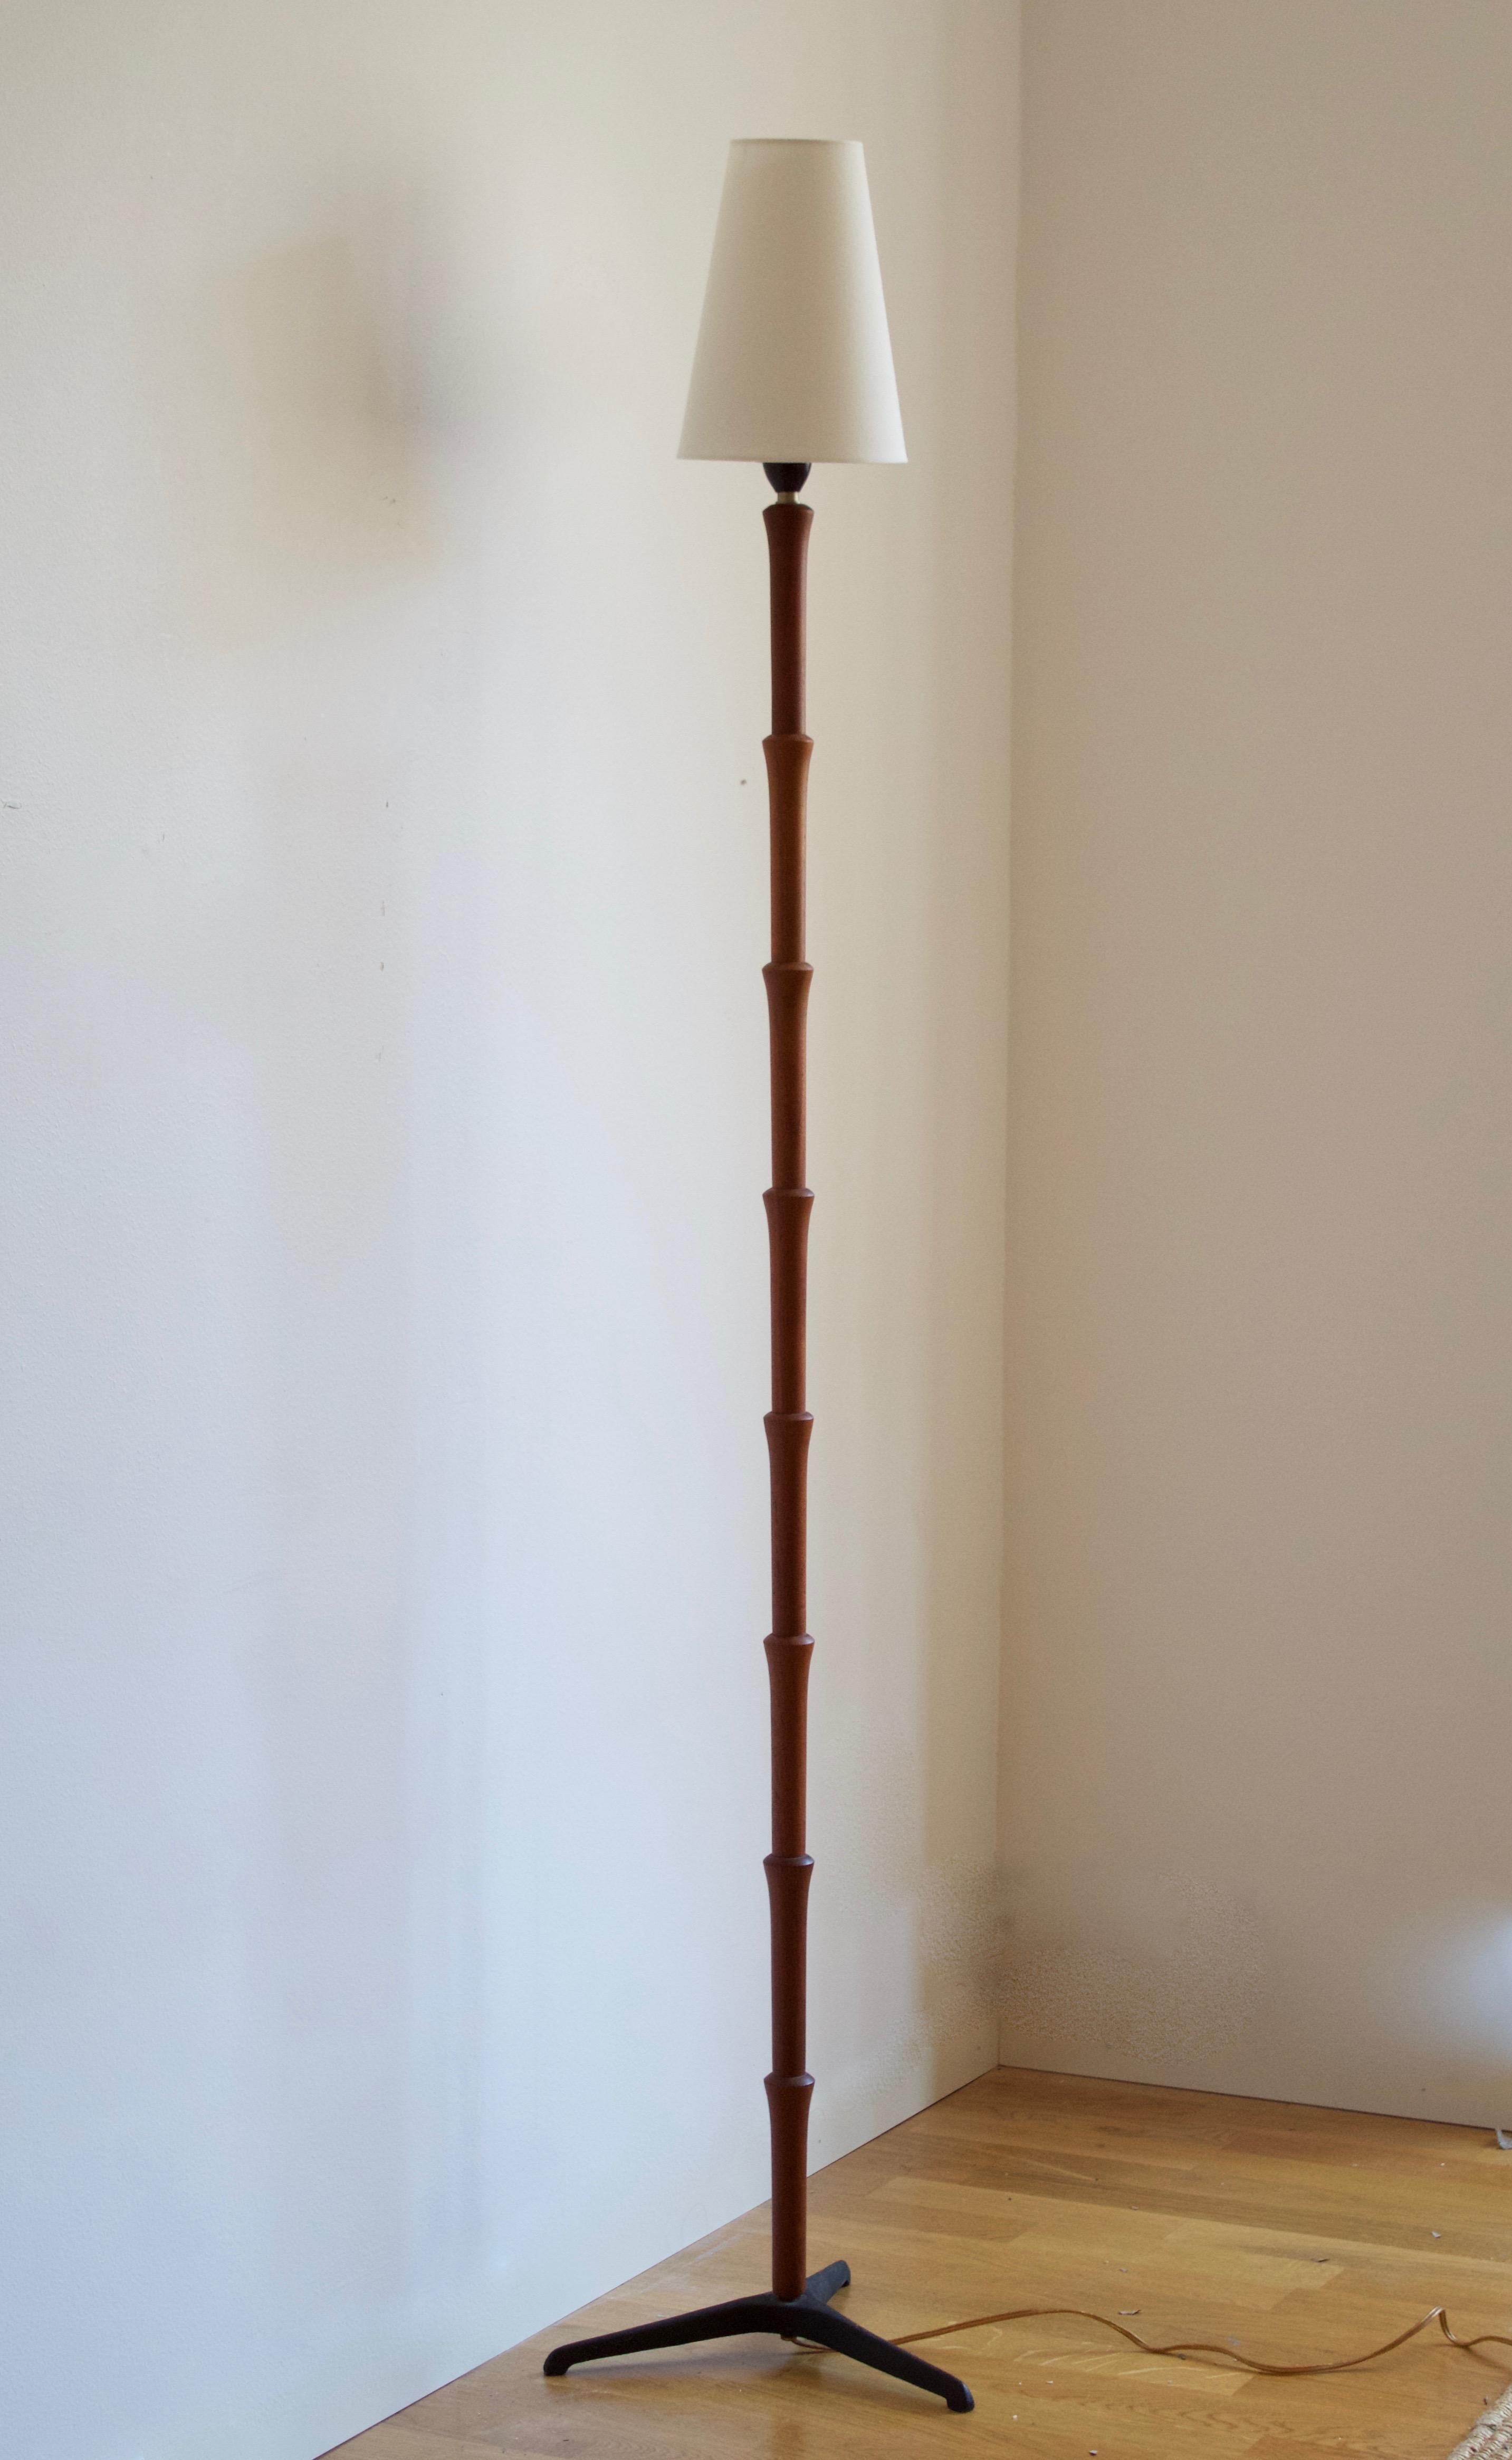 An adjustable modernist floor lamp, design attributed to Svend Aage Holm Sørensen, Denmark, 1950s. Adjustable in height. Brand new lampshade.

In teak, black painted cast iron foot.

Other designers of the period include Paavo Tynell, Serge